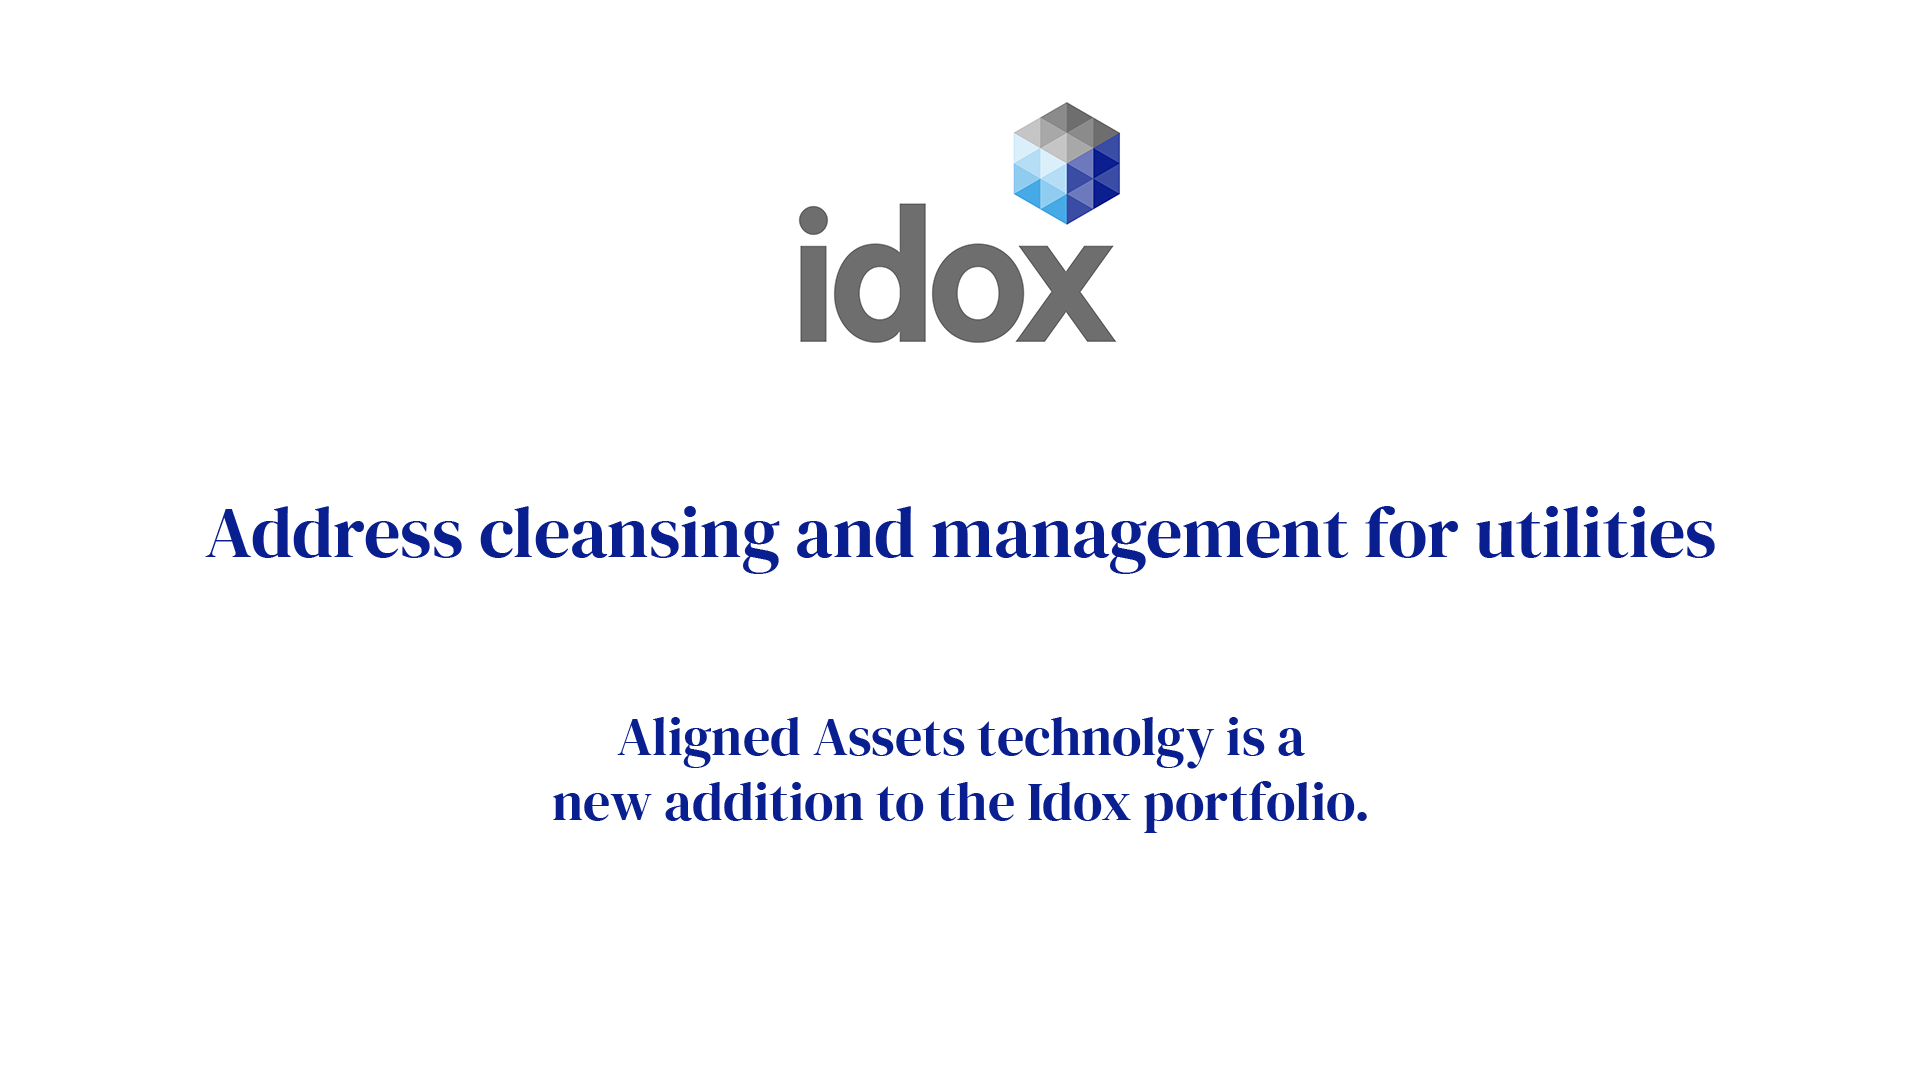 Address Cleansing and Management for Utilities